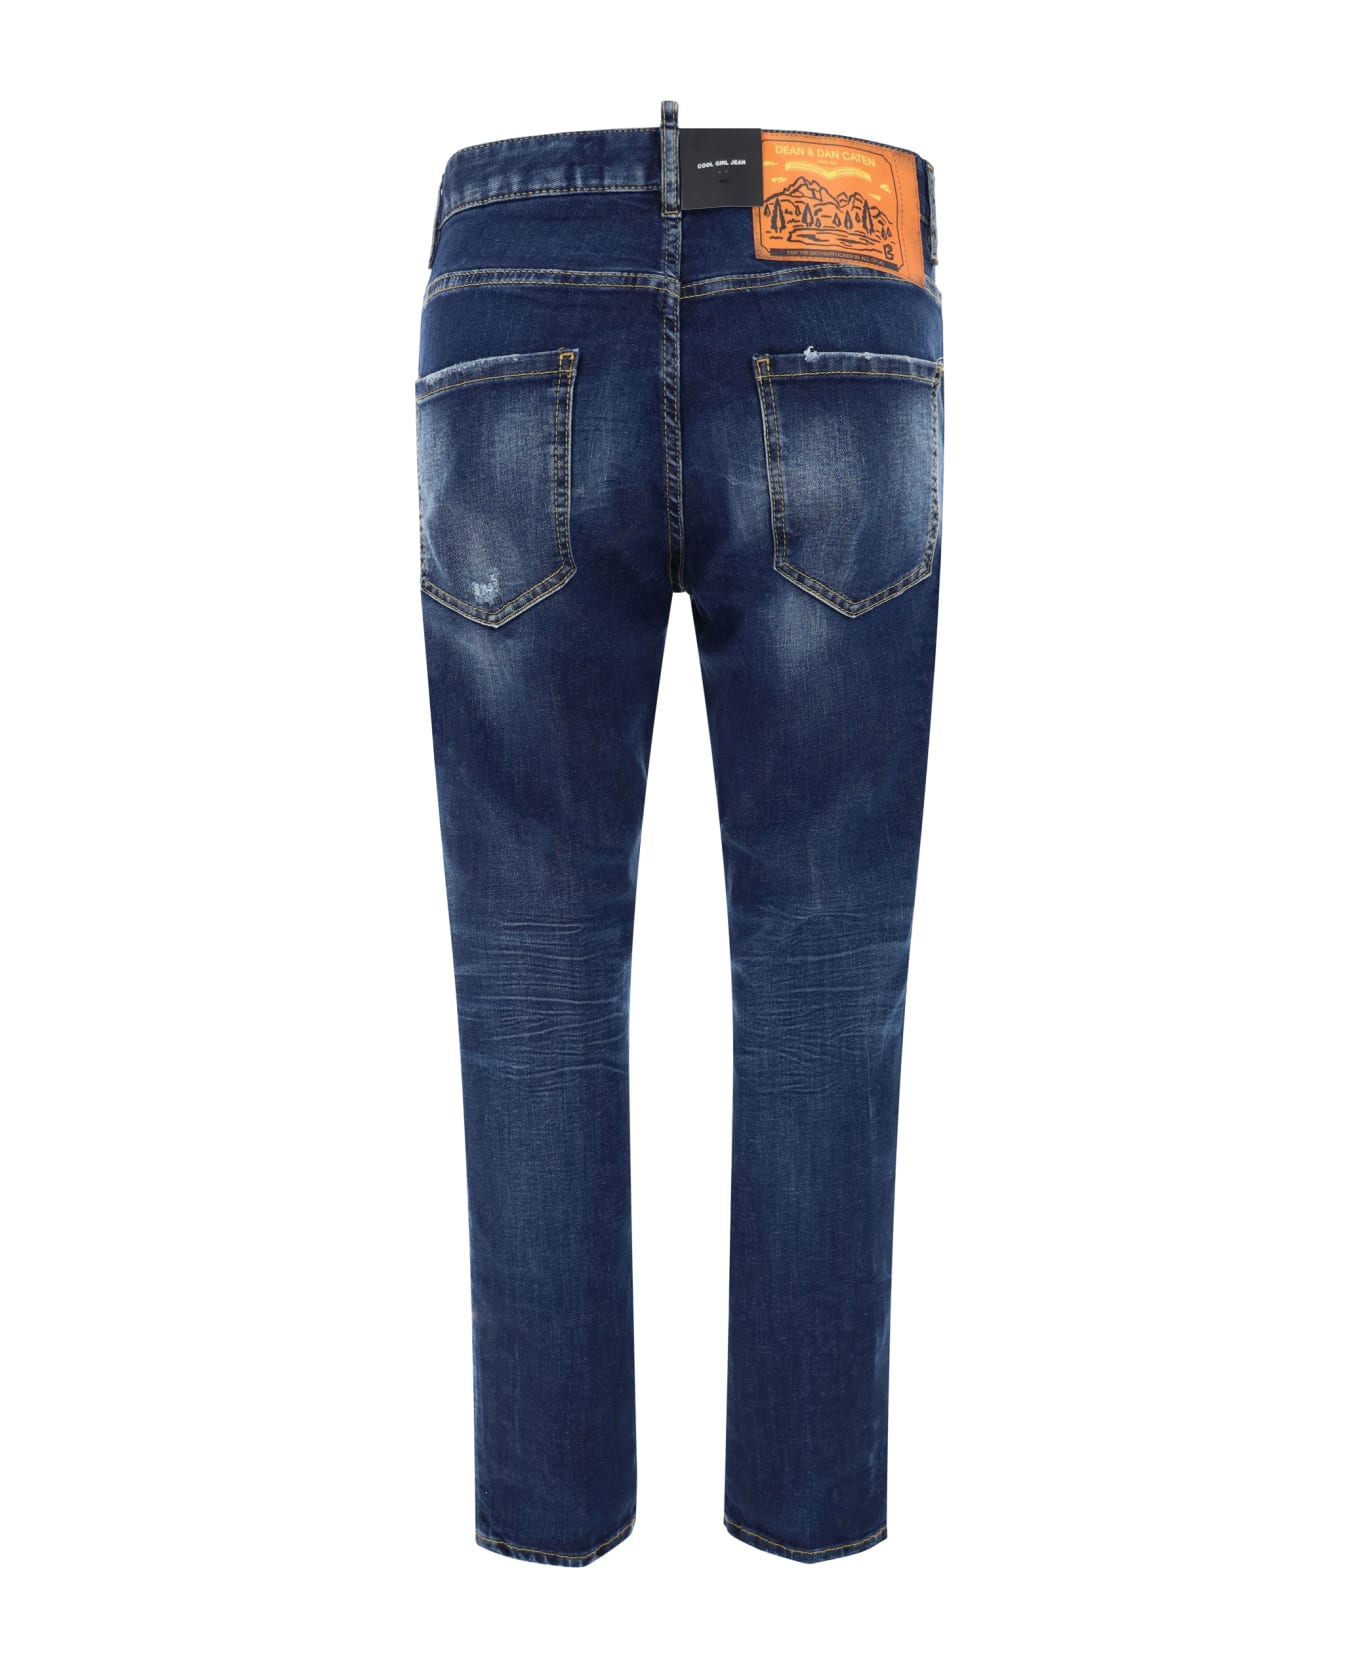 Dsquared2 Cool Girl Jeans - 470 デニム